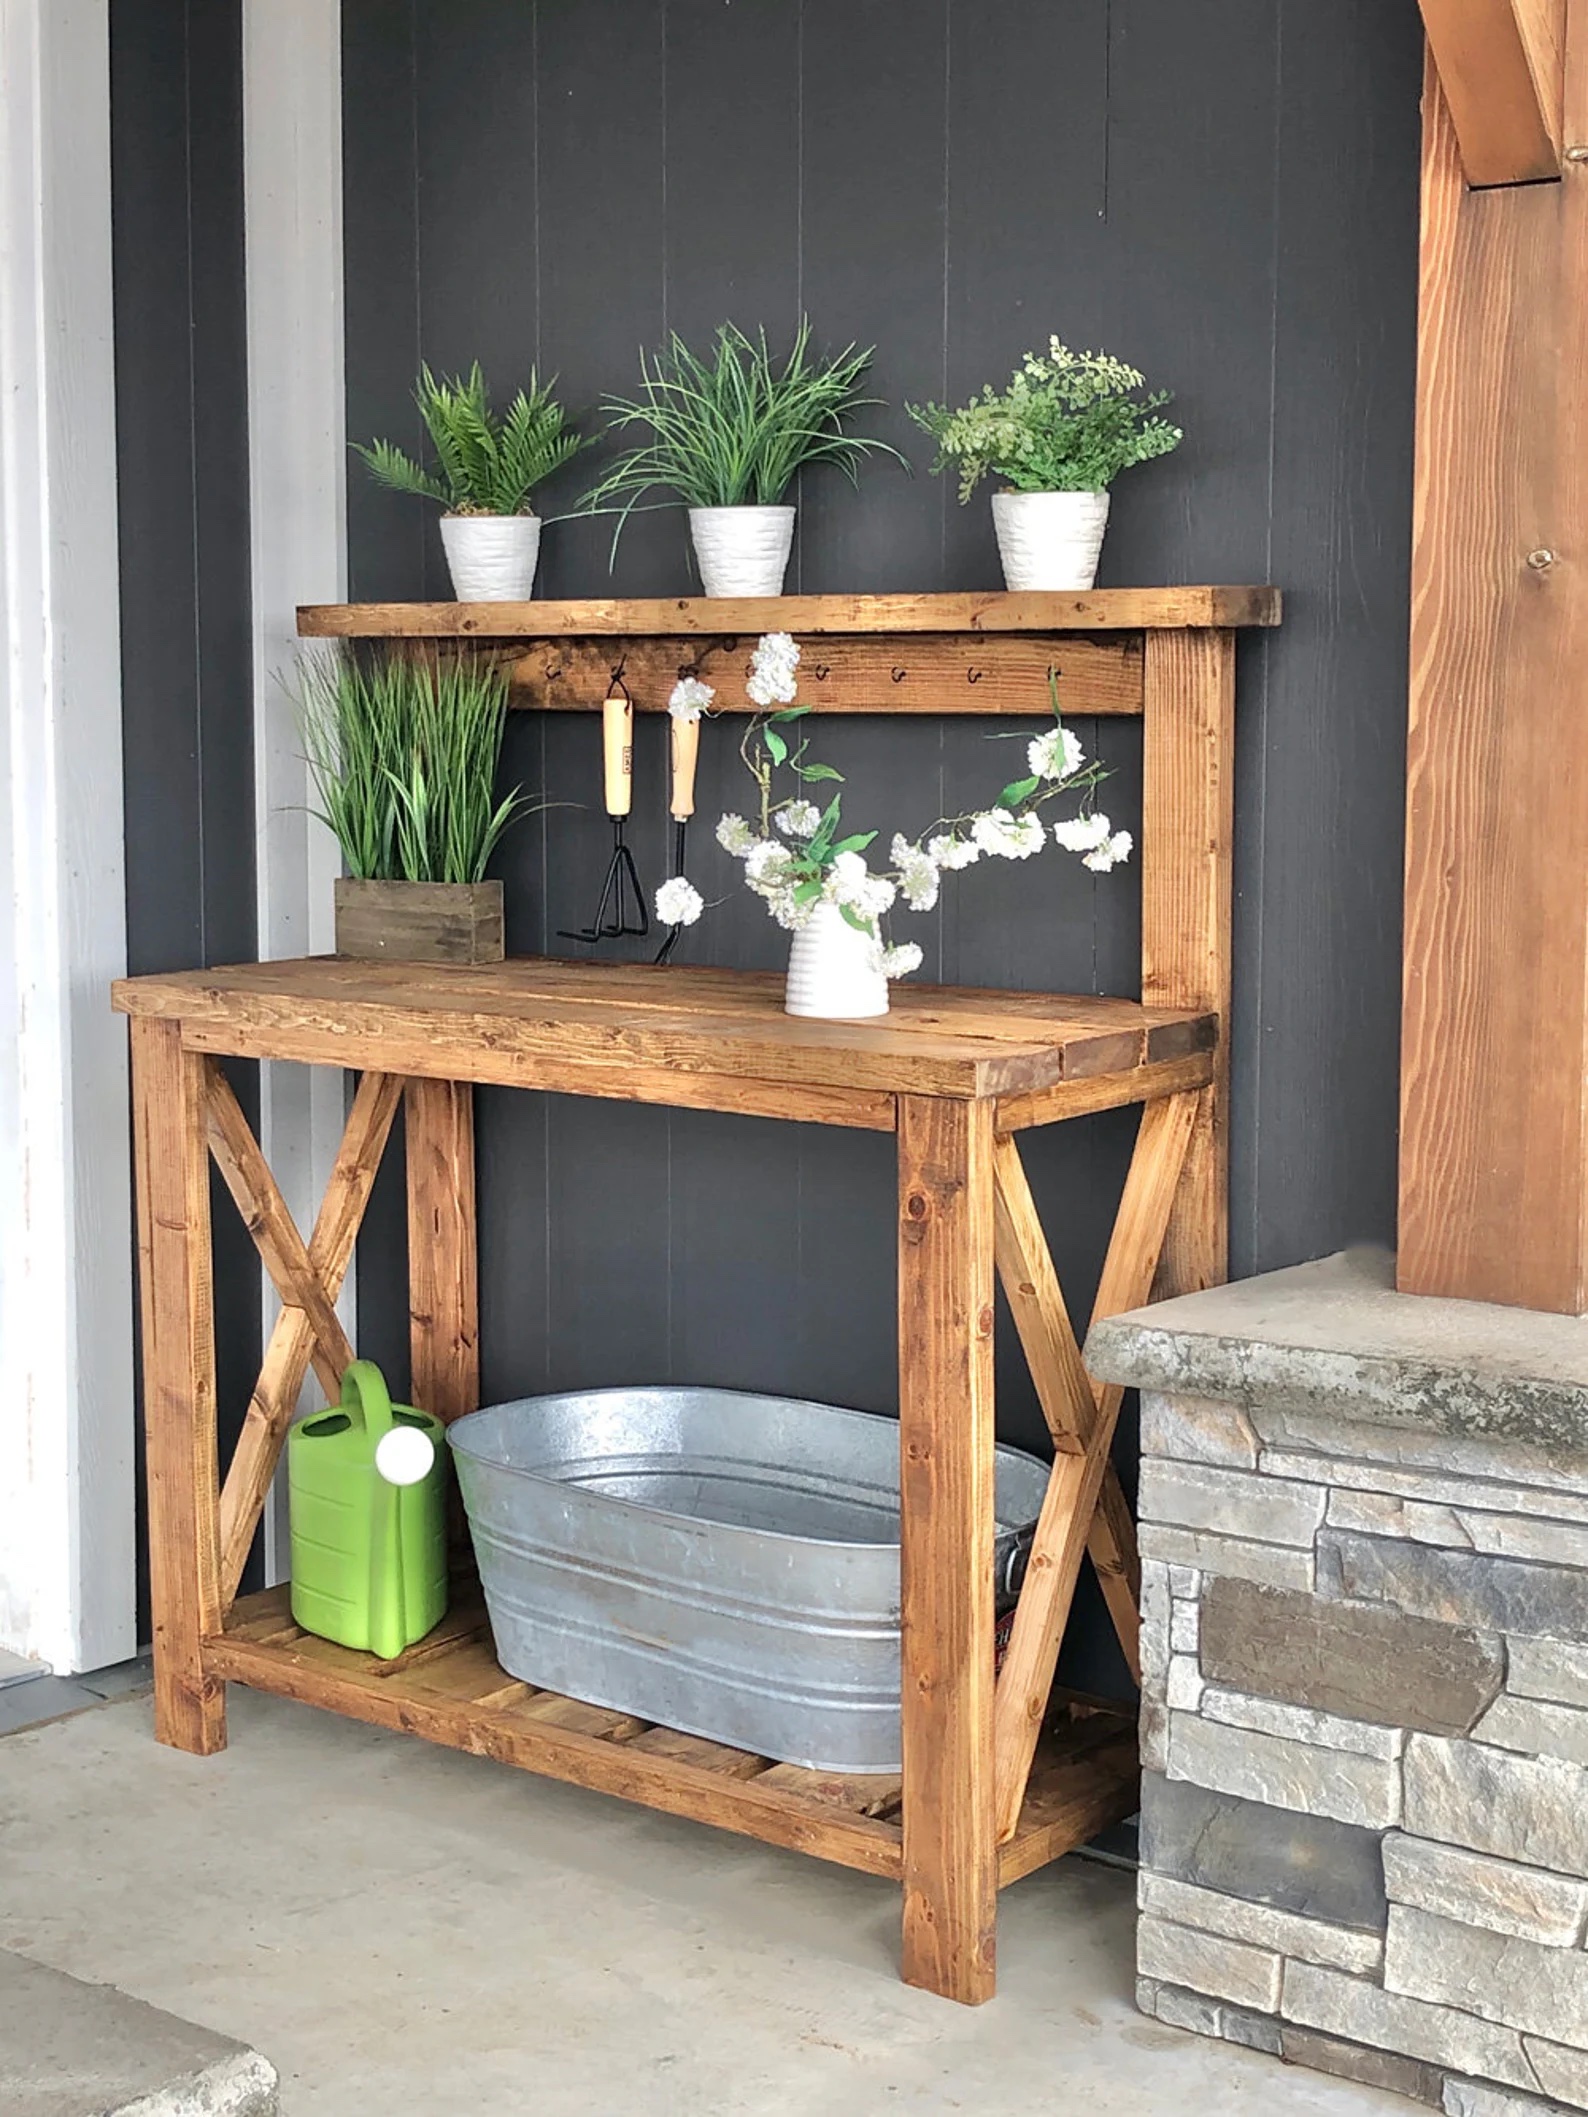 Farmhouse-style potting bench with potted plants on top shelf